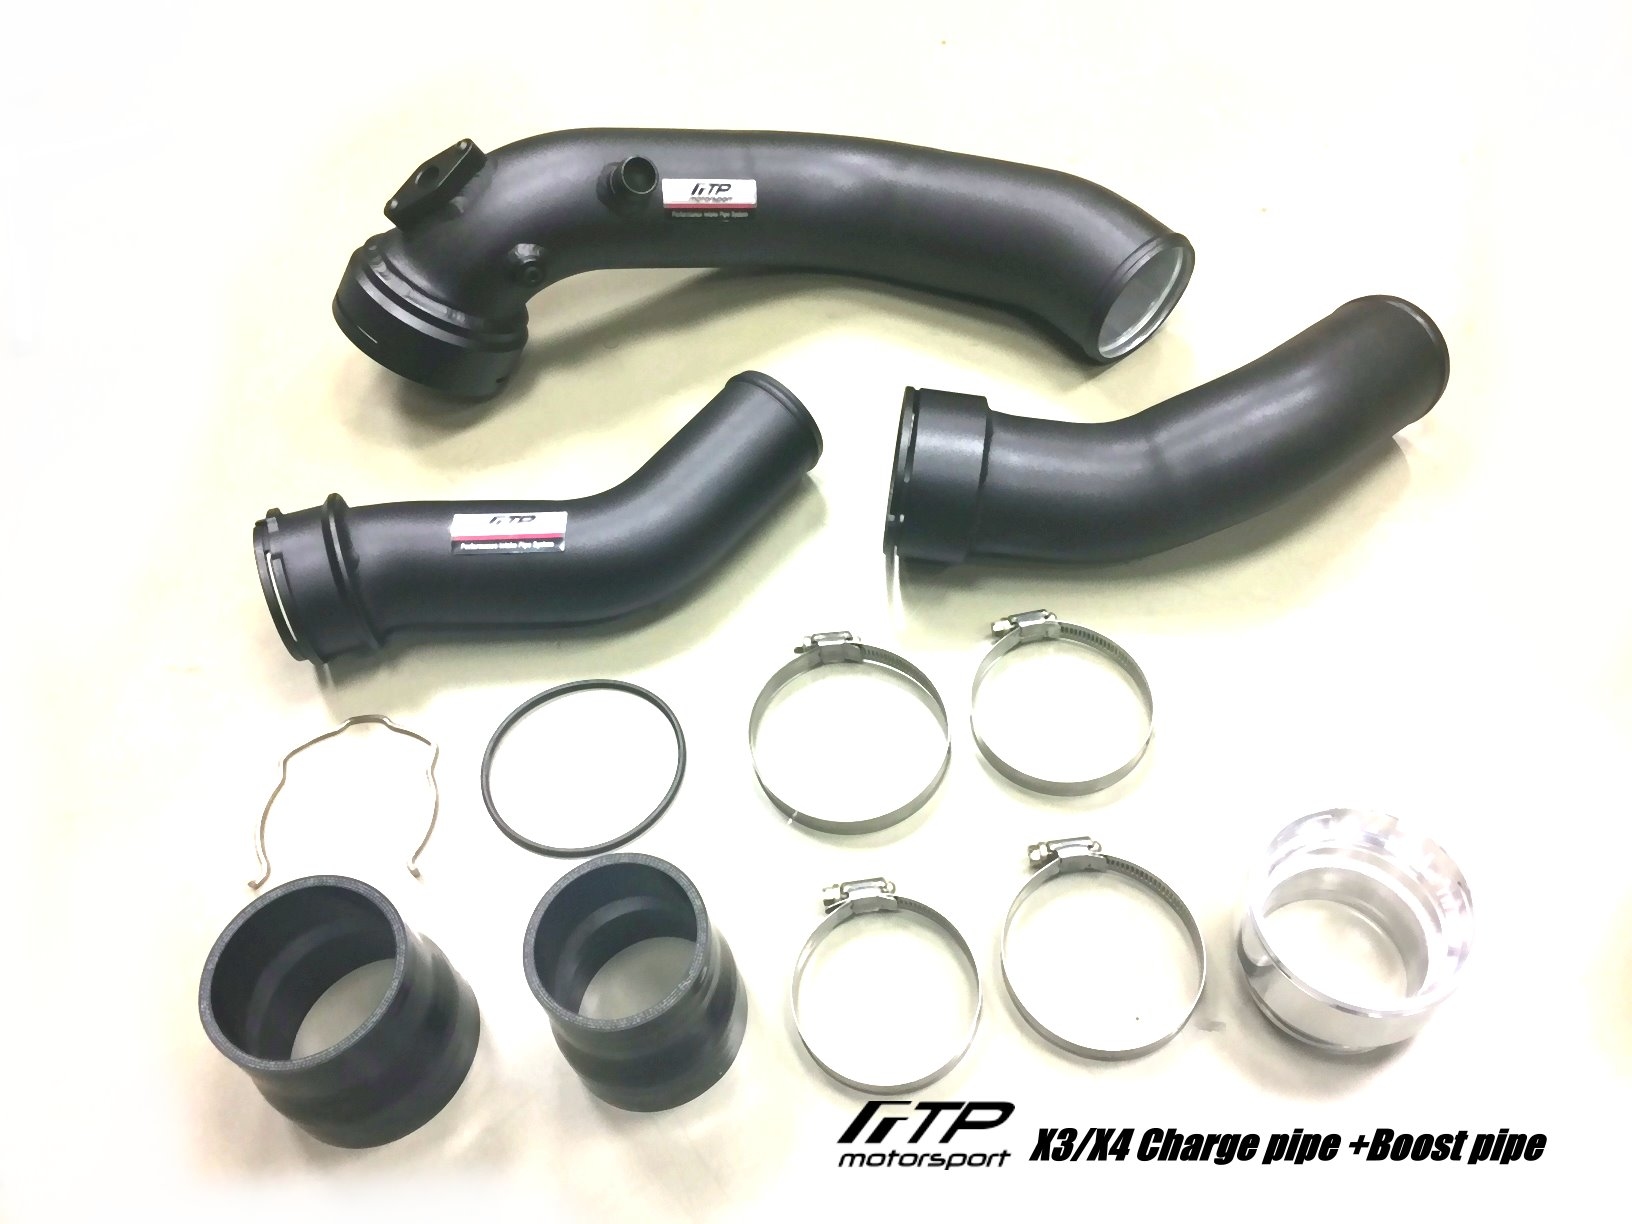 Aluminum Rev9 Boost Charge Pipe Kit IP-083_4 compatible with 2013-17 BMW F25 X3 N20 Motor 